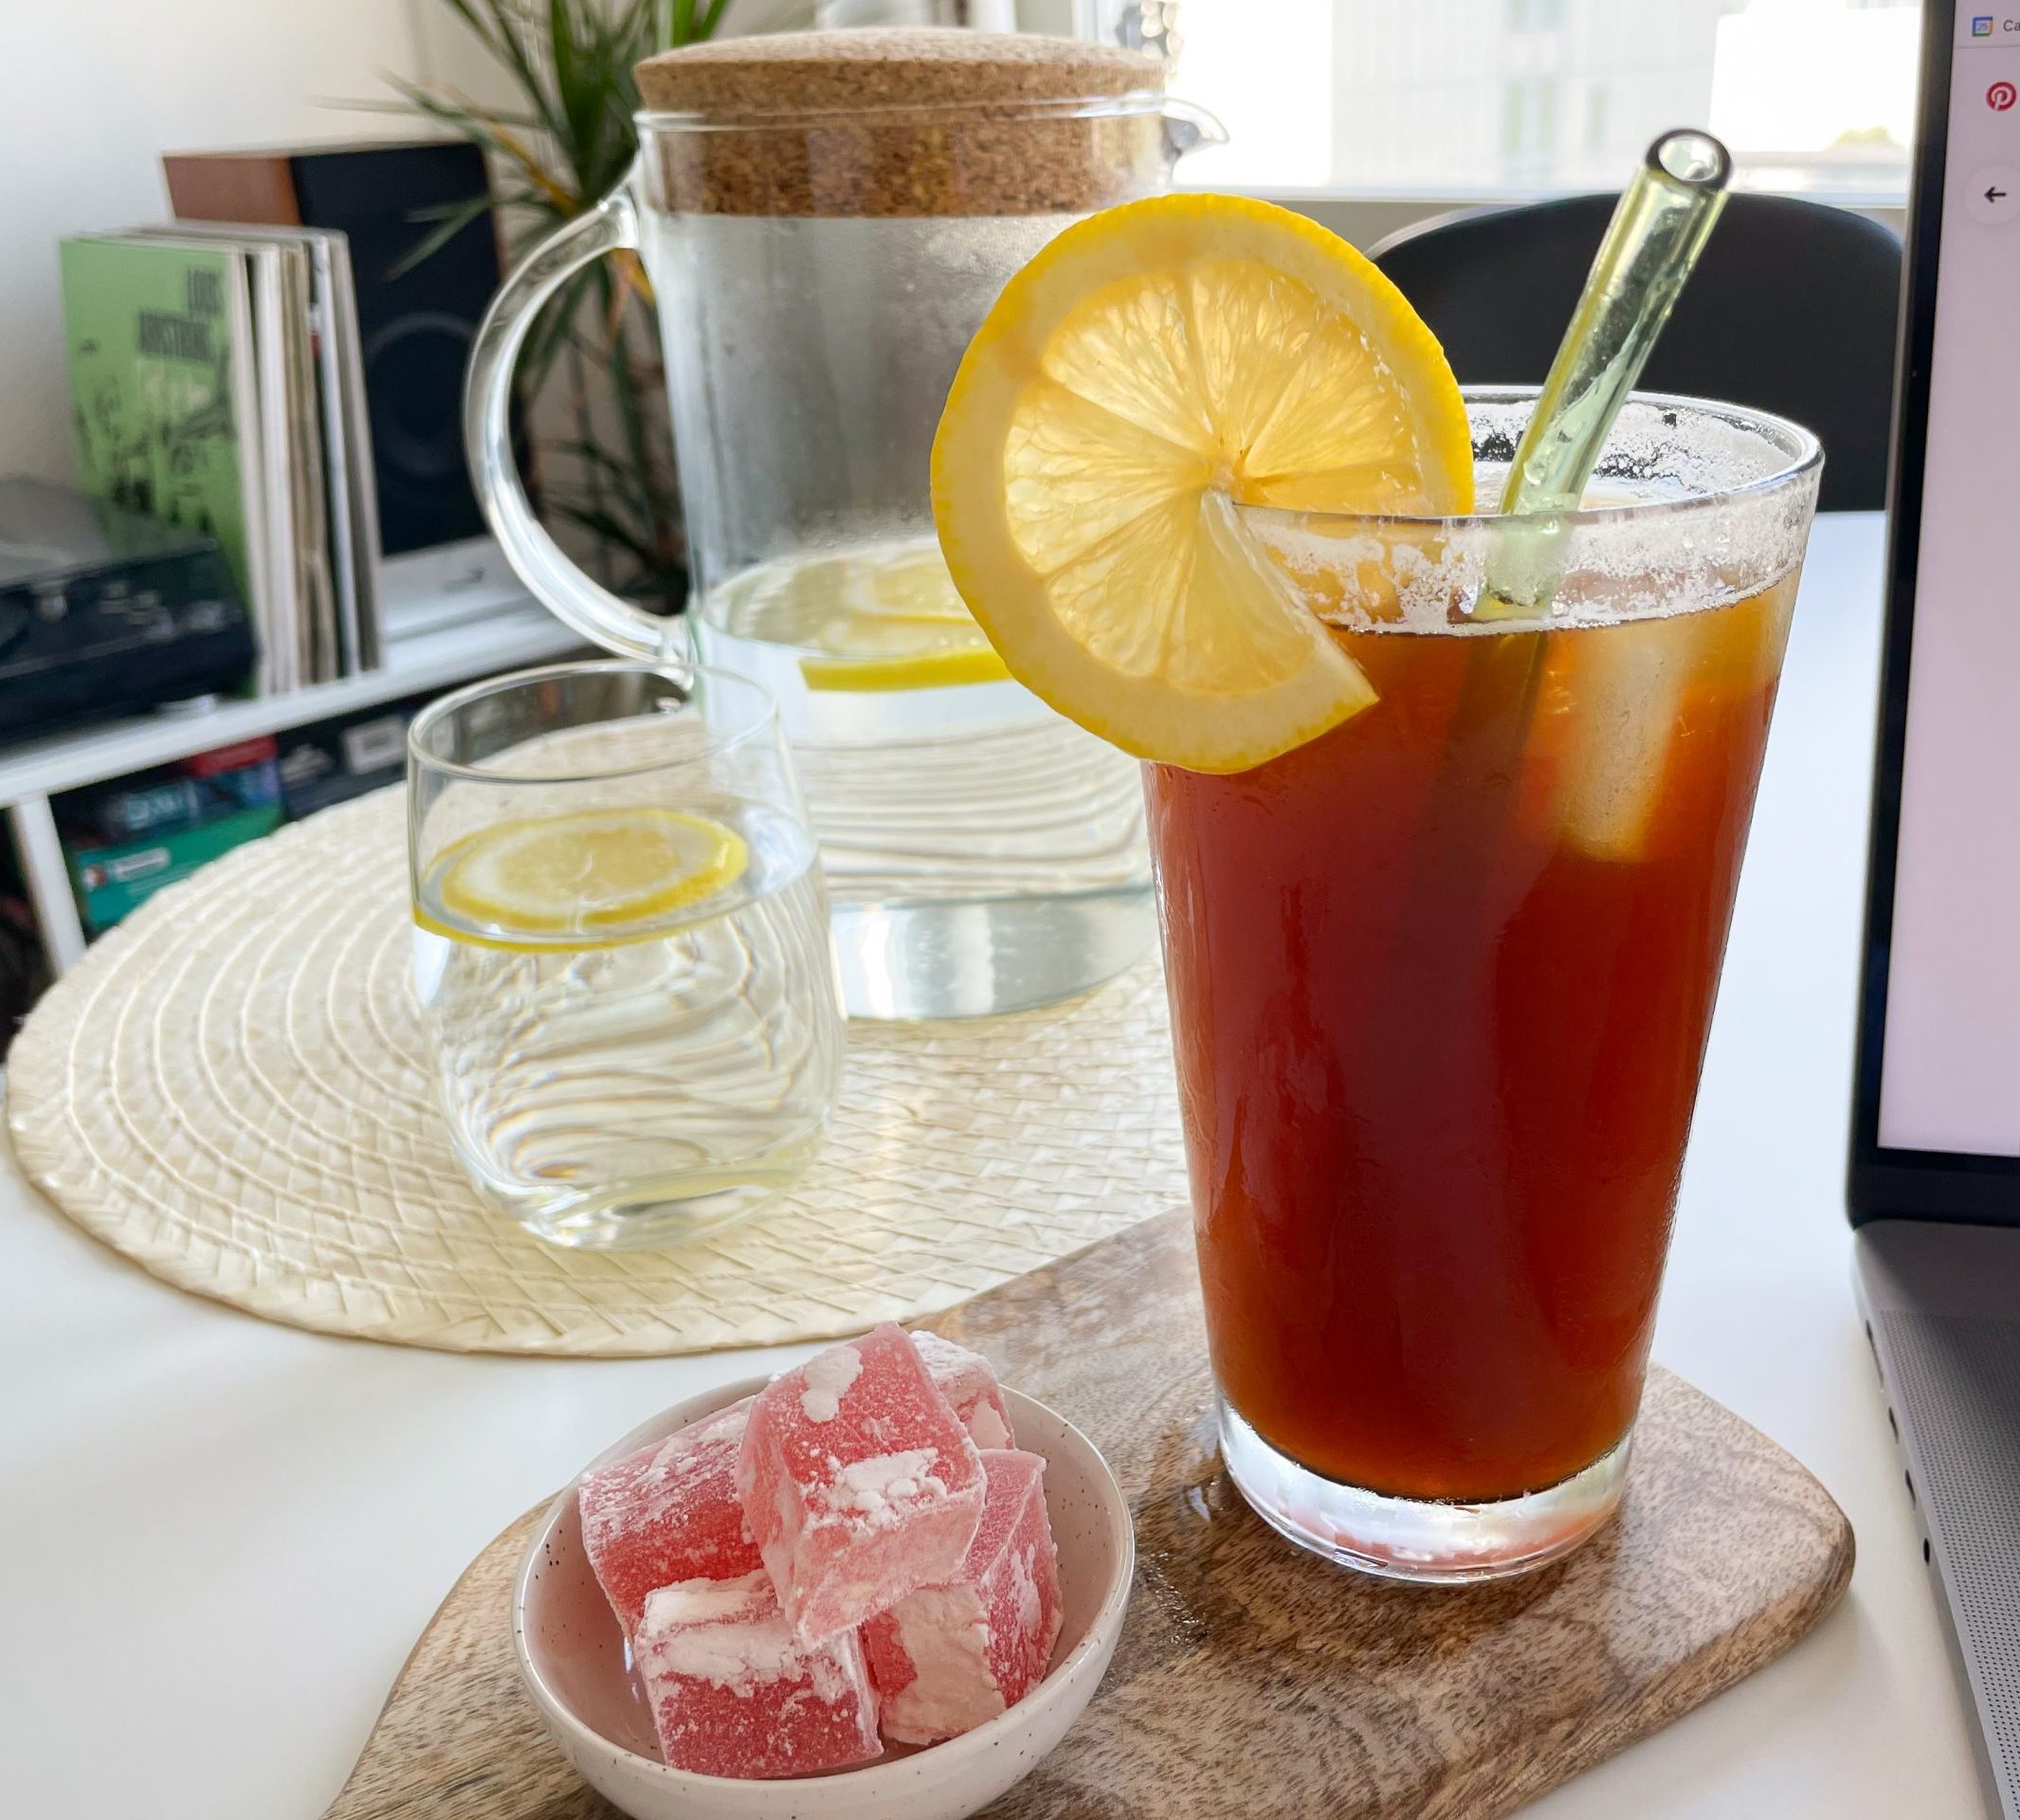 Iced Coffee Lemonade: An easy way to enjoy Liminha Over Ice from Nespresso Vertuo